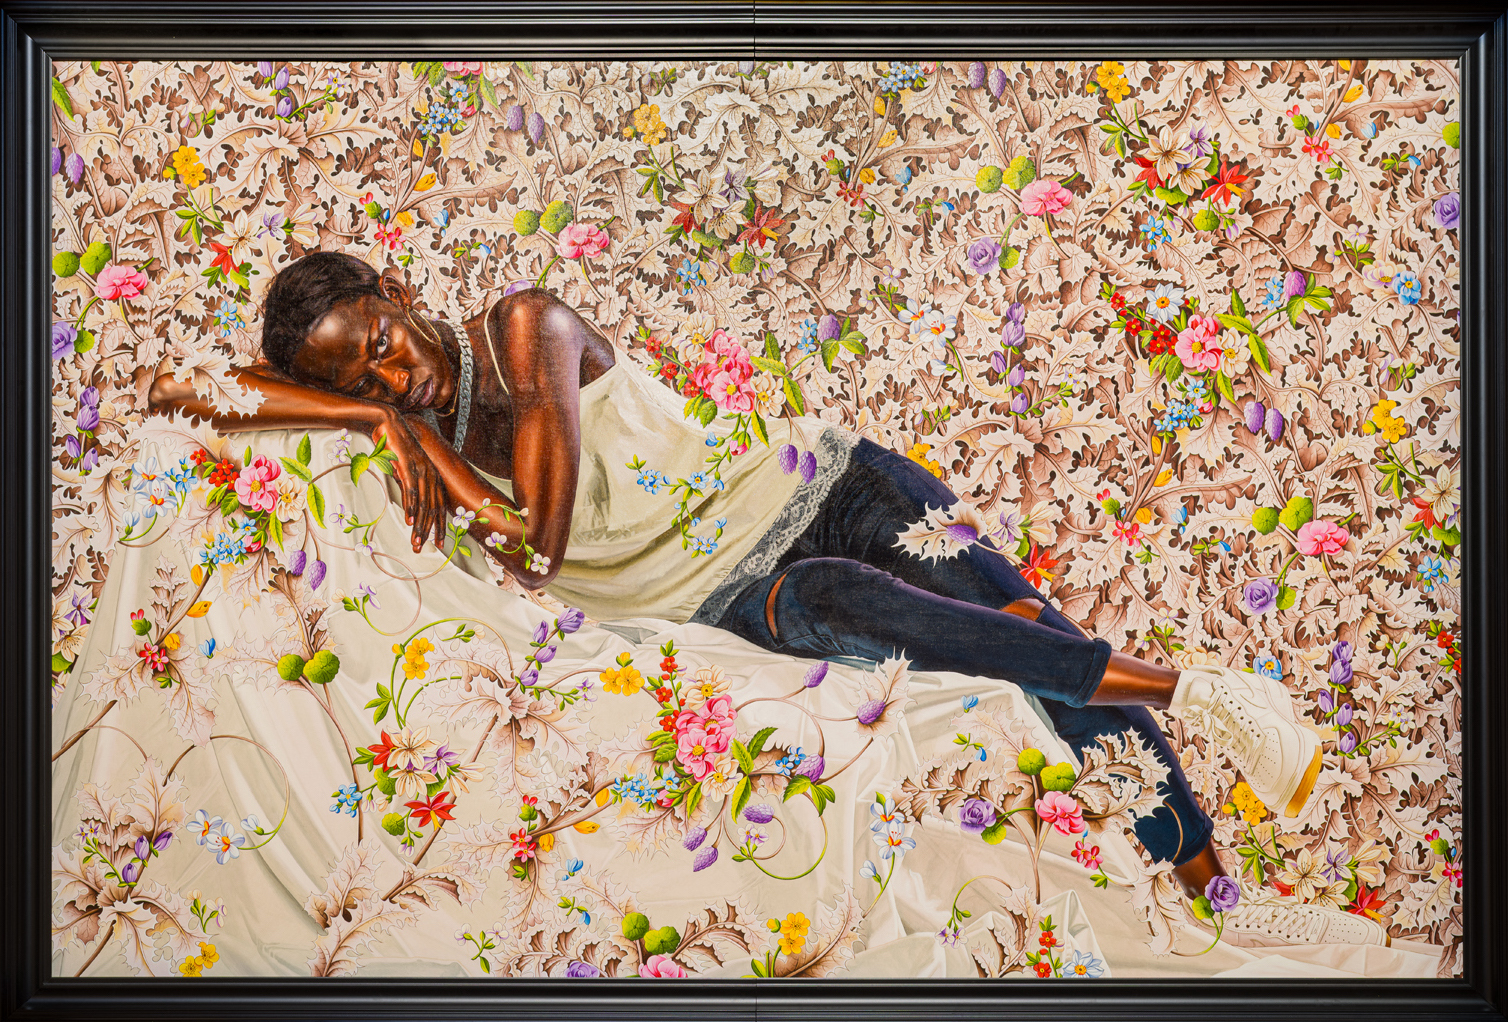 A Black woman leans on a white draped surface surrounded by white blossoms